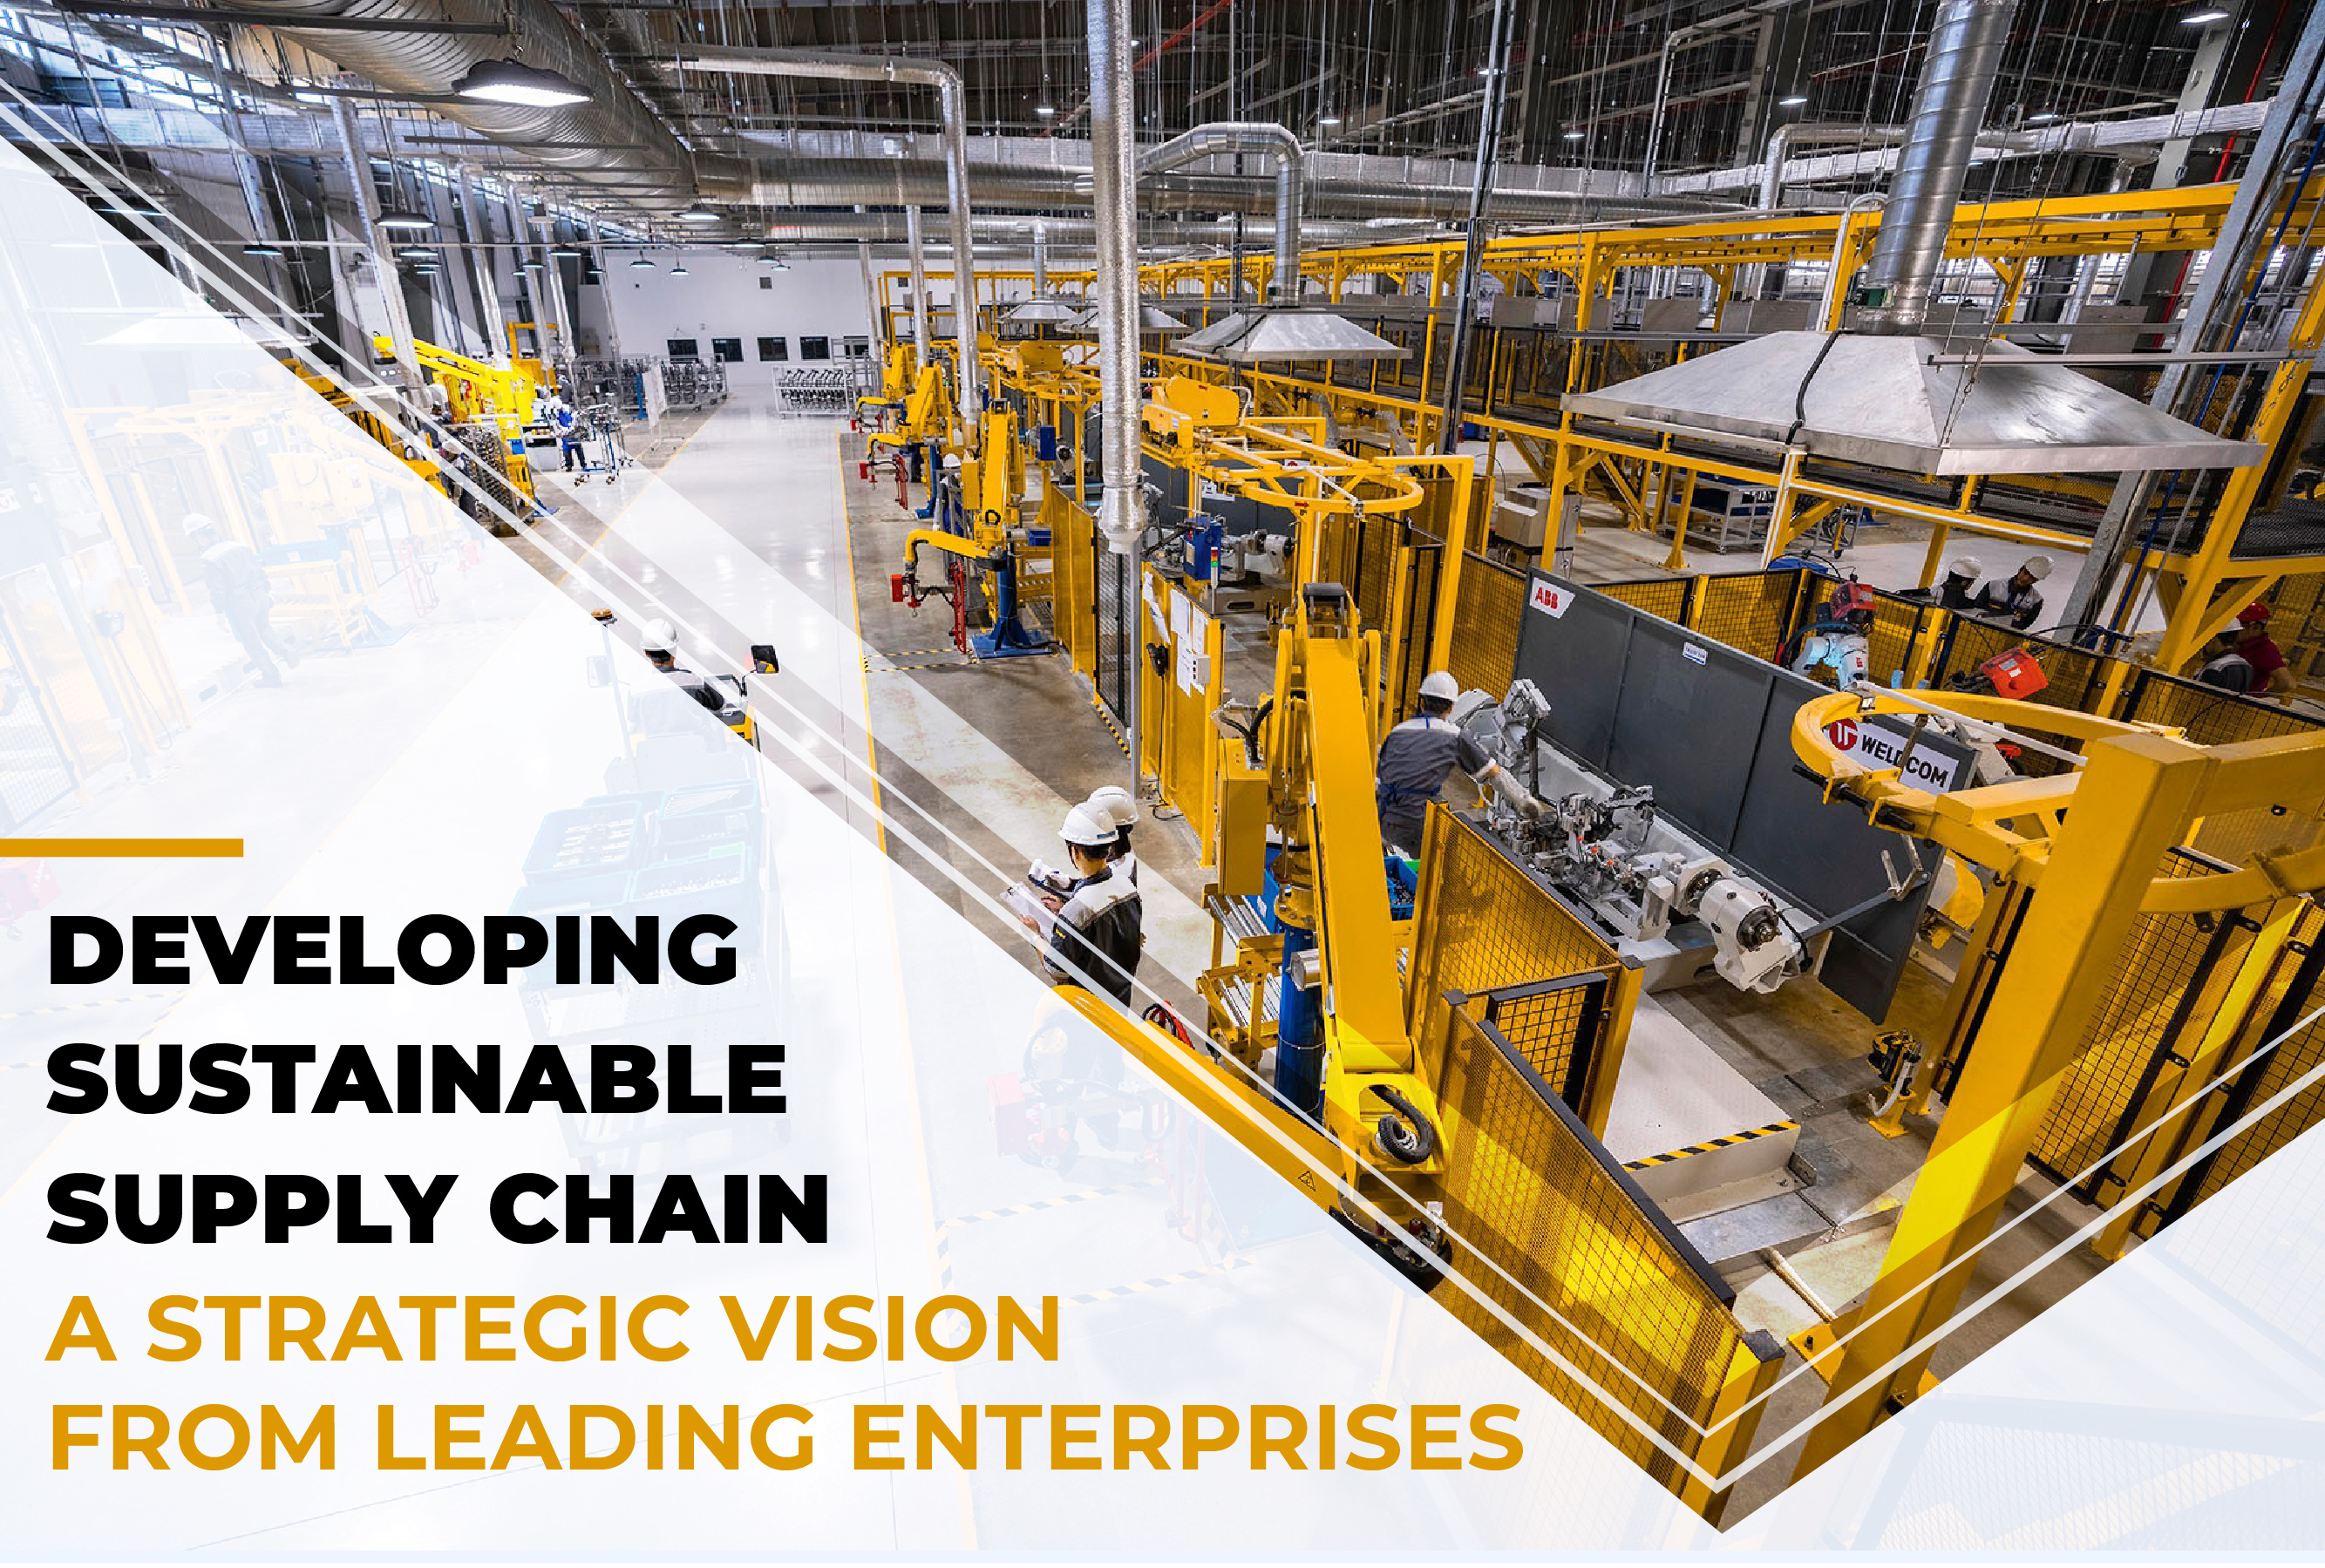 DEVELOPING SUSTAINABLE SUPPLY CHAIN A STRATEGIC VISION FROM LEADING ENTERPRISES